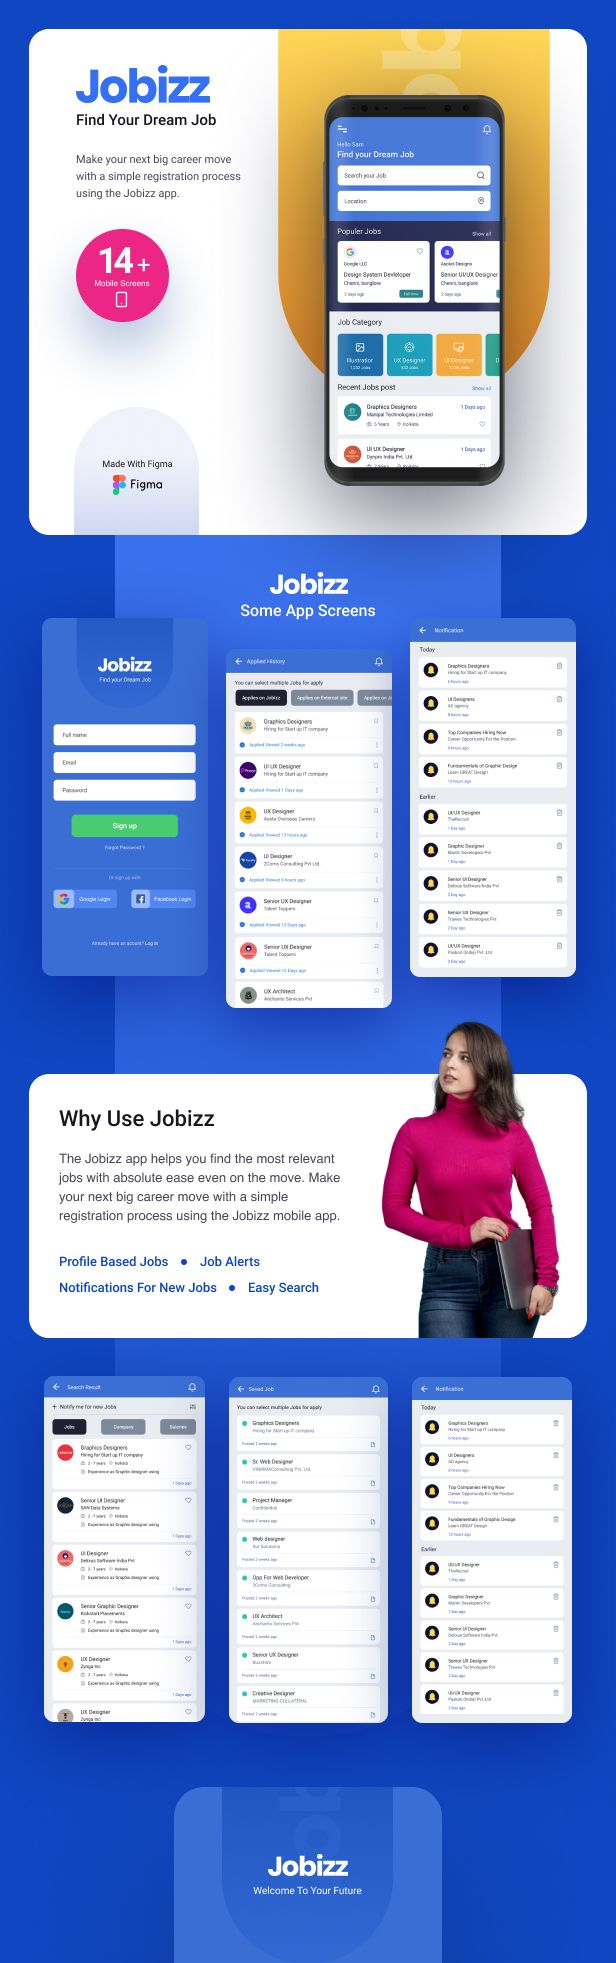 Jobizz Mobile App and Landing Page | An Online Job Search Figma Template - 1